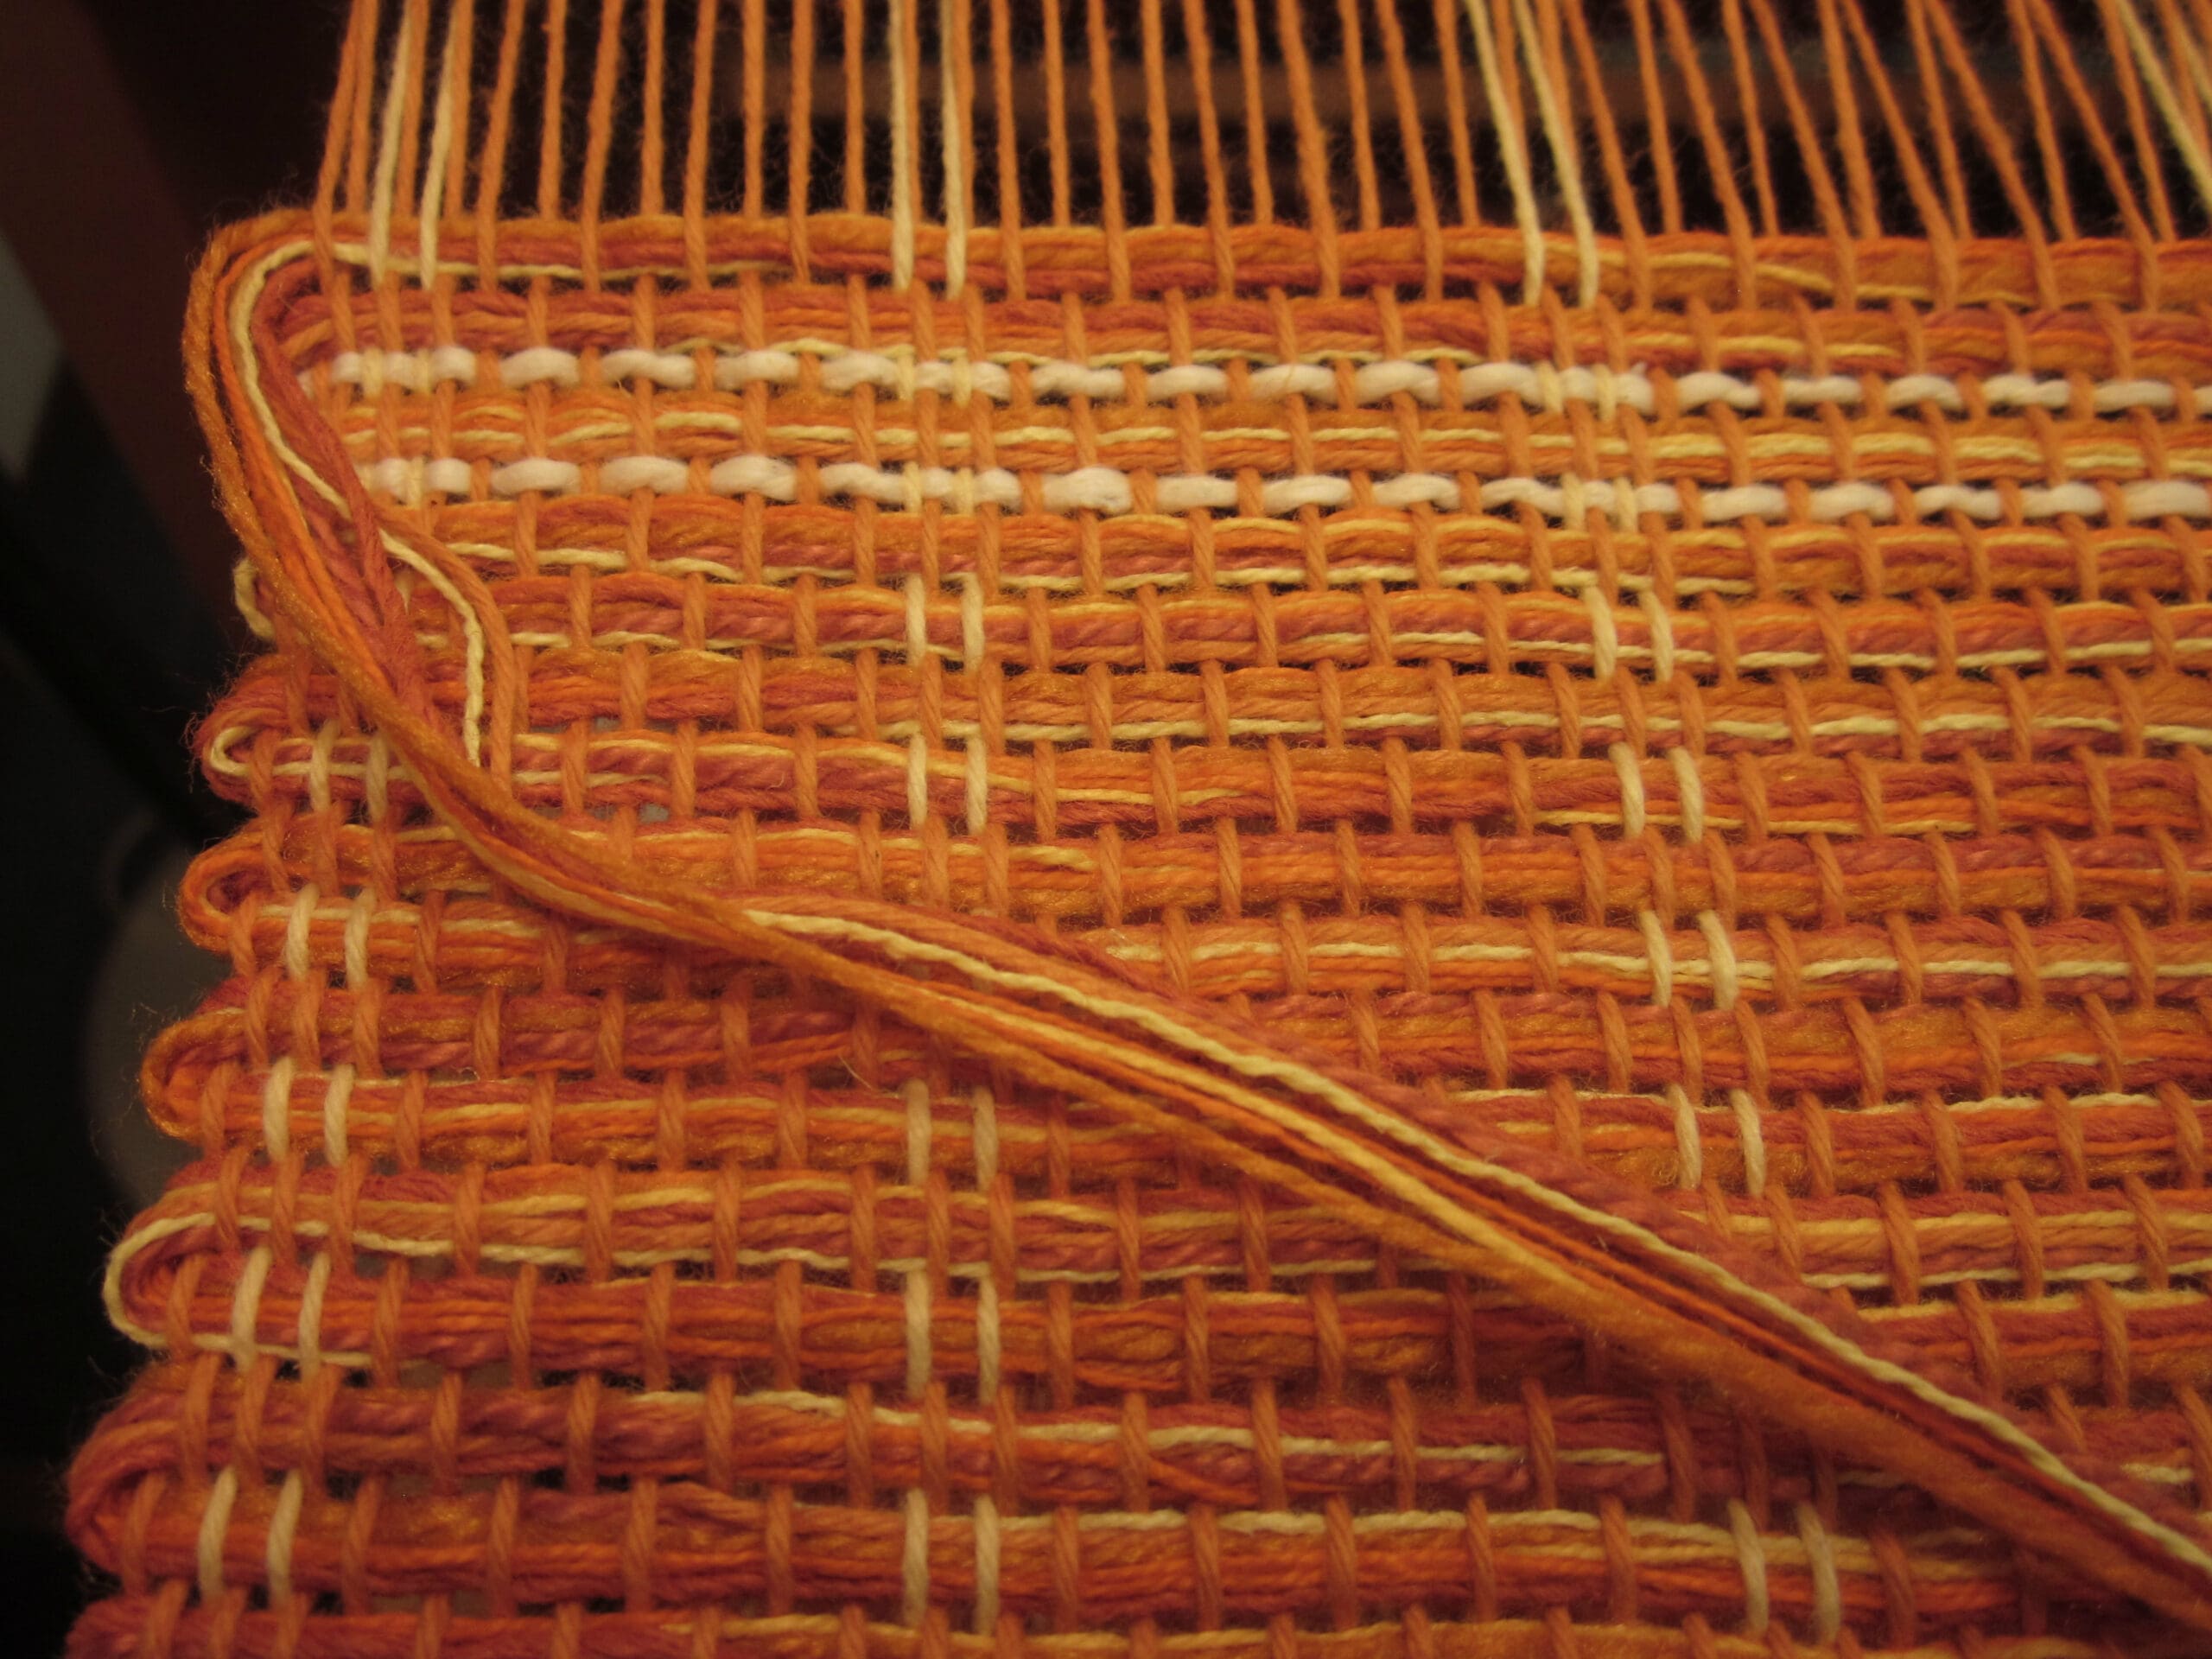 Multiple yarns in the weft